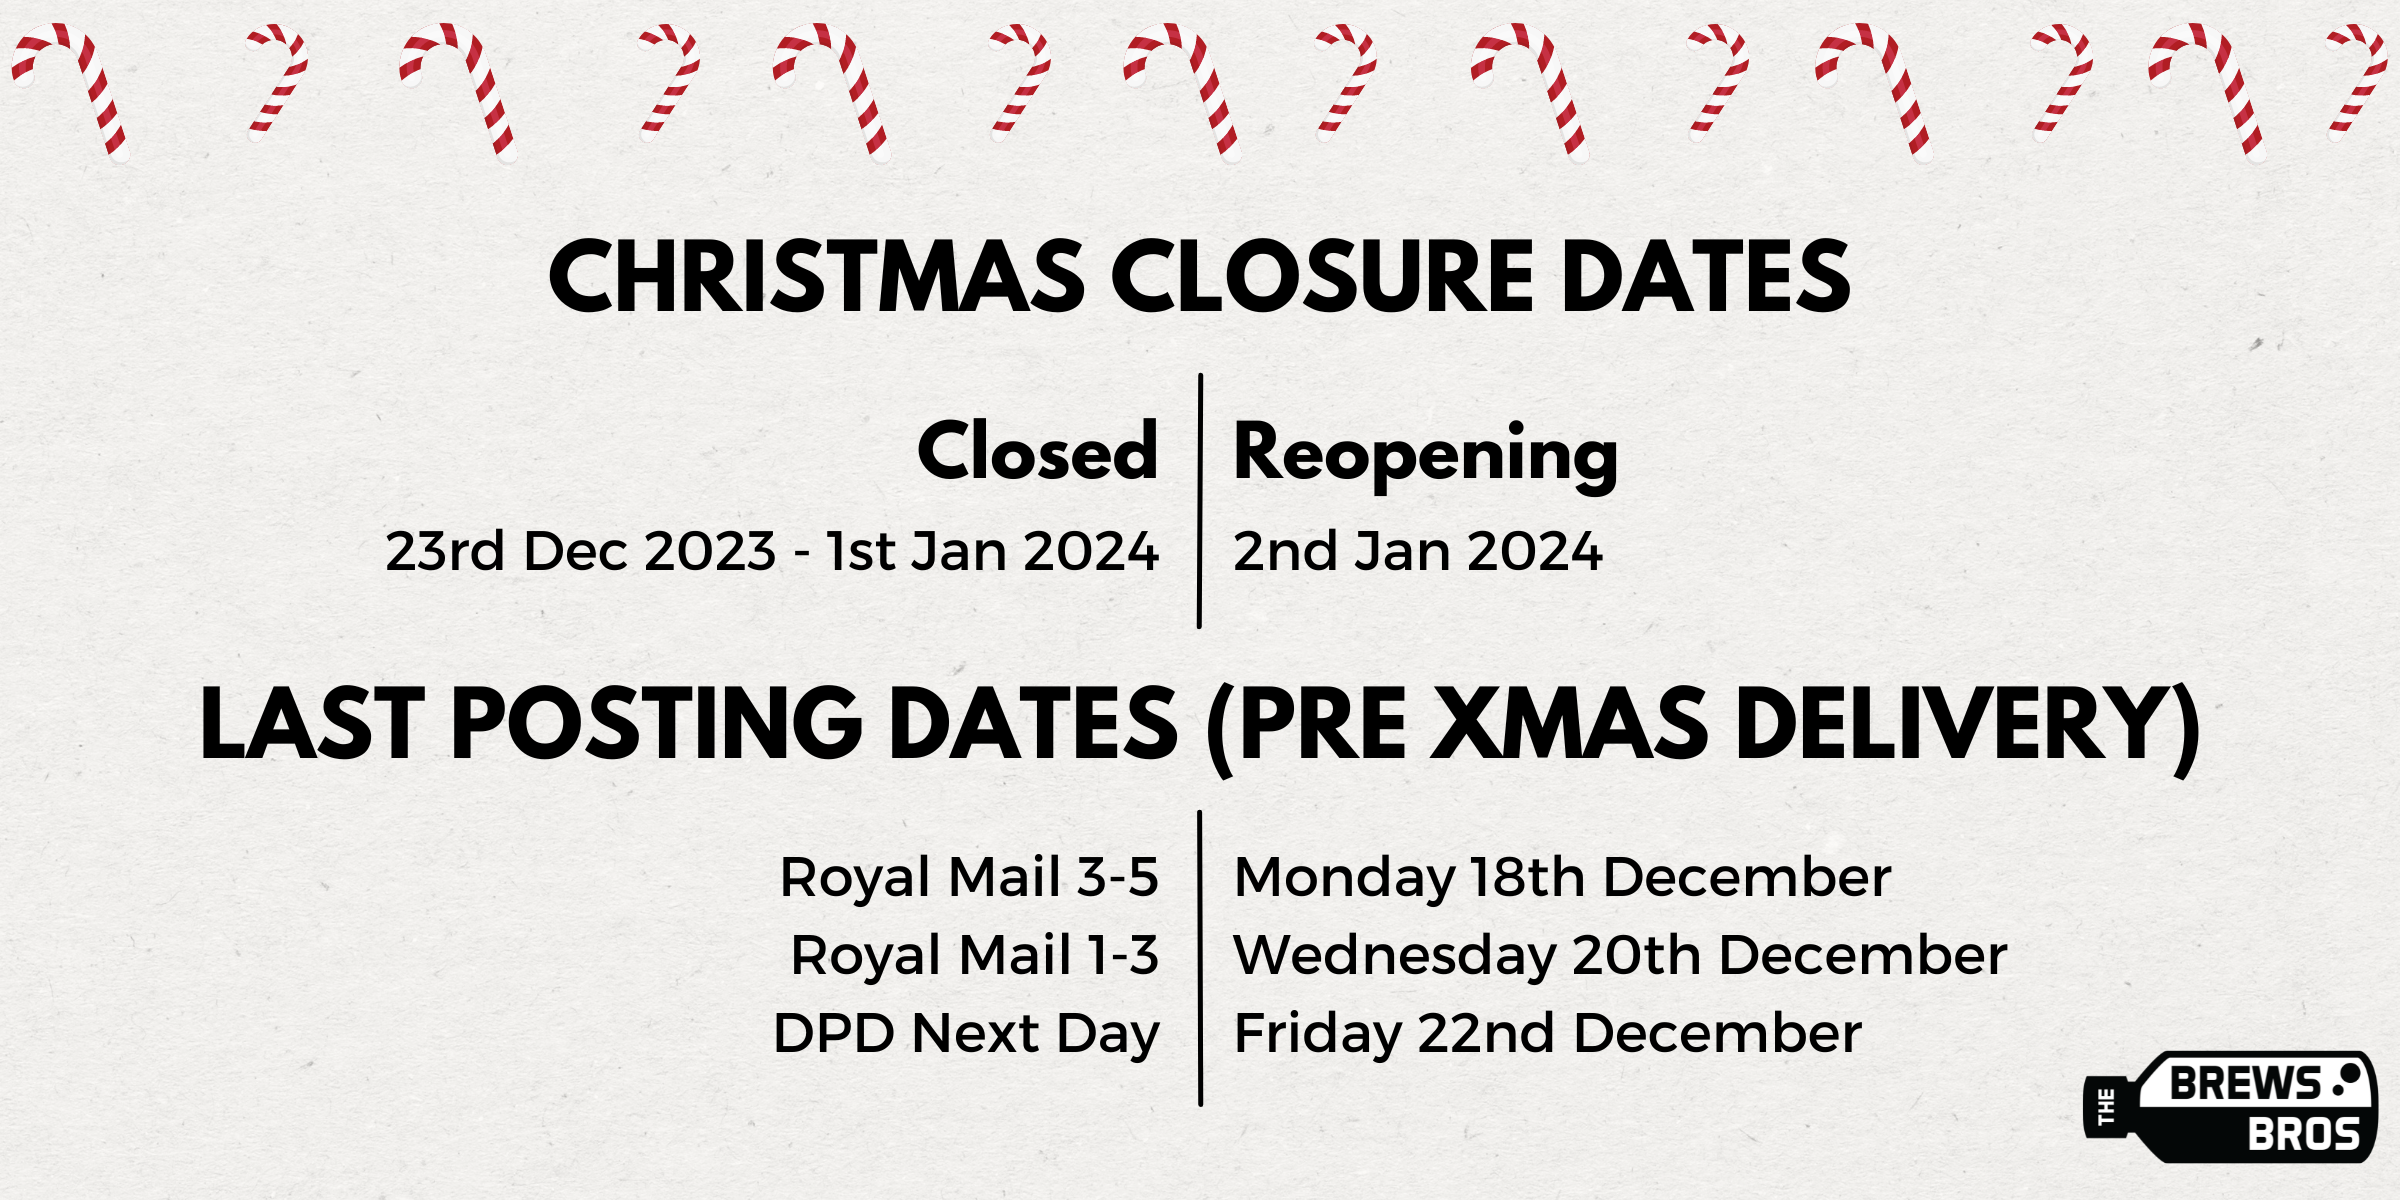 Christmas Business Hours Dates Animated Business Facebook Cover (2400 x 1200 px).png